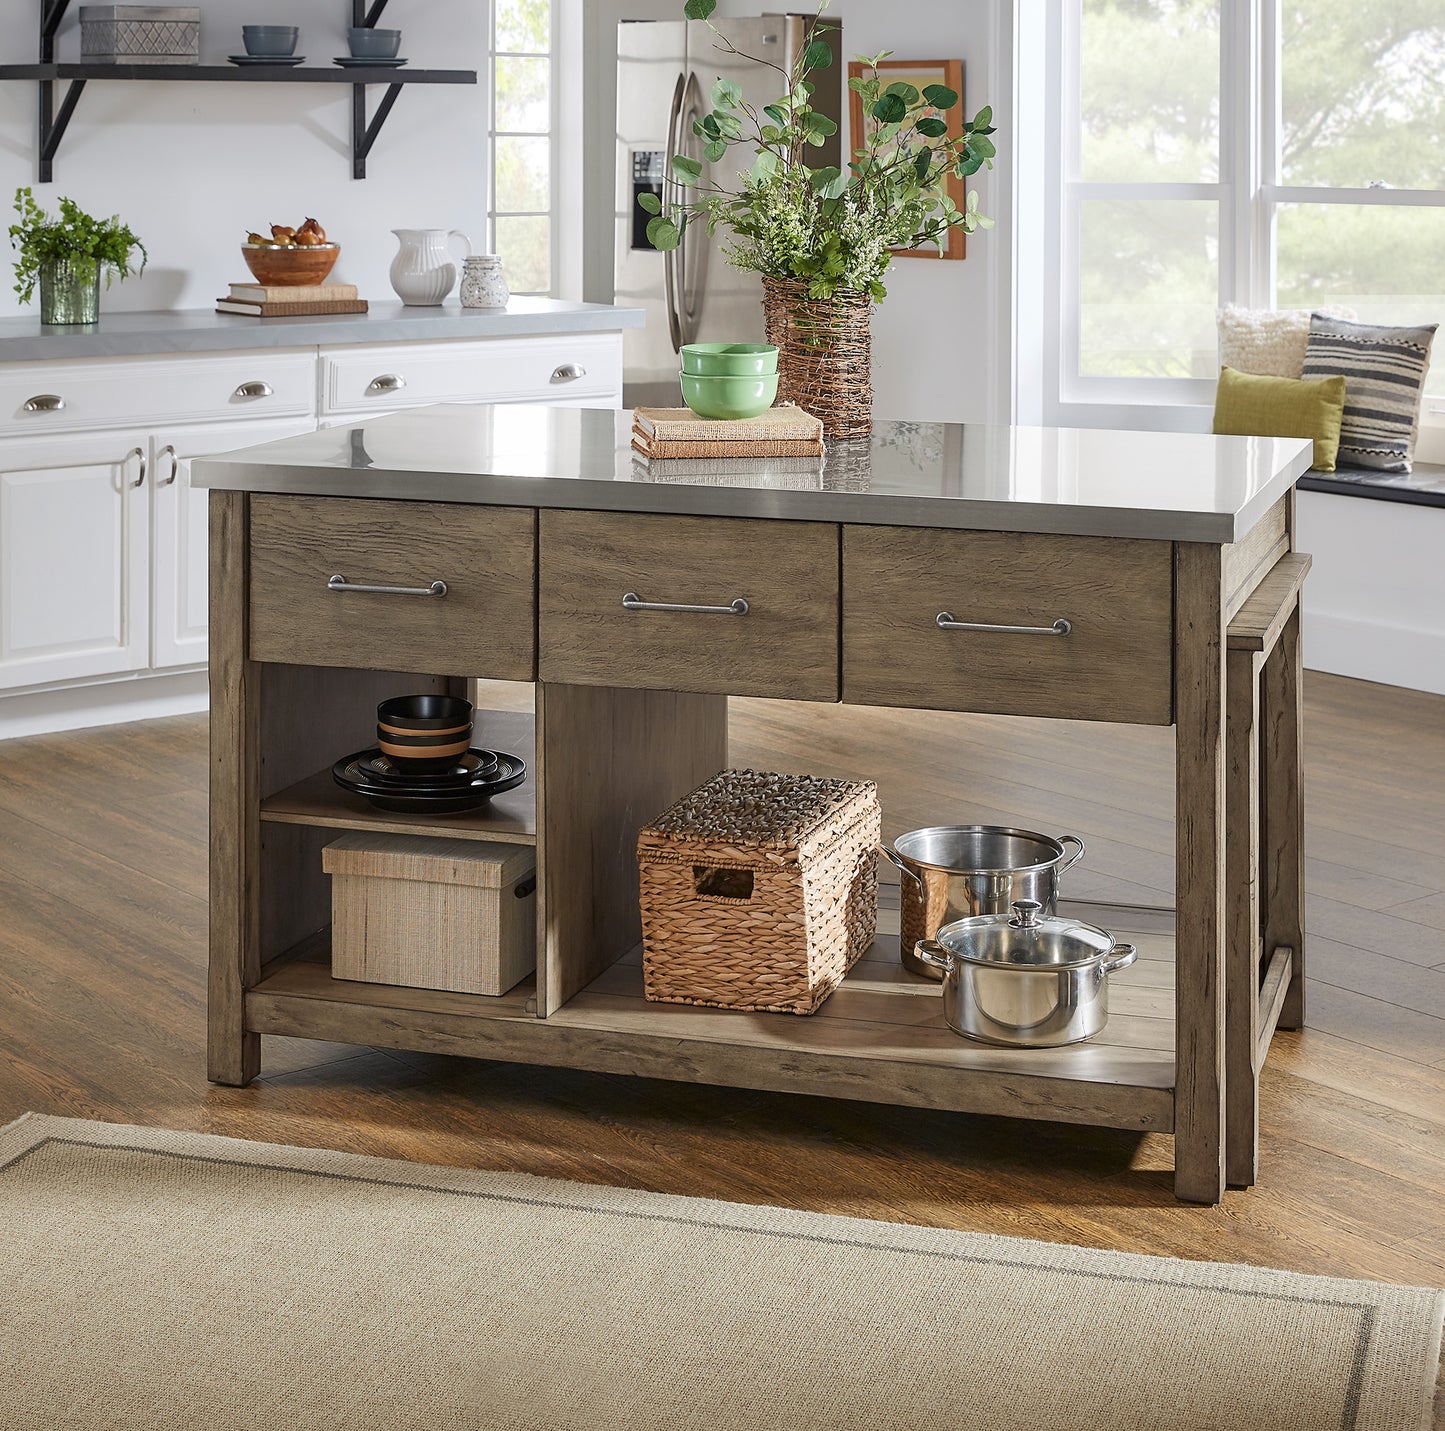 Reclaimed Look Extendable Kitchen Island - Antique Grey Finish, Stainless Steel Top